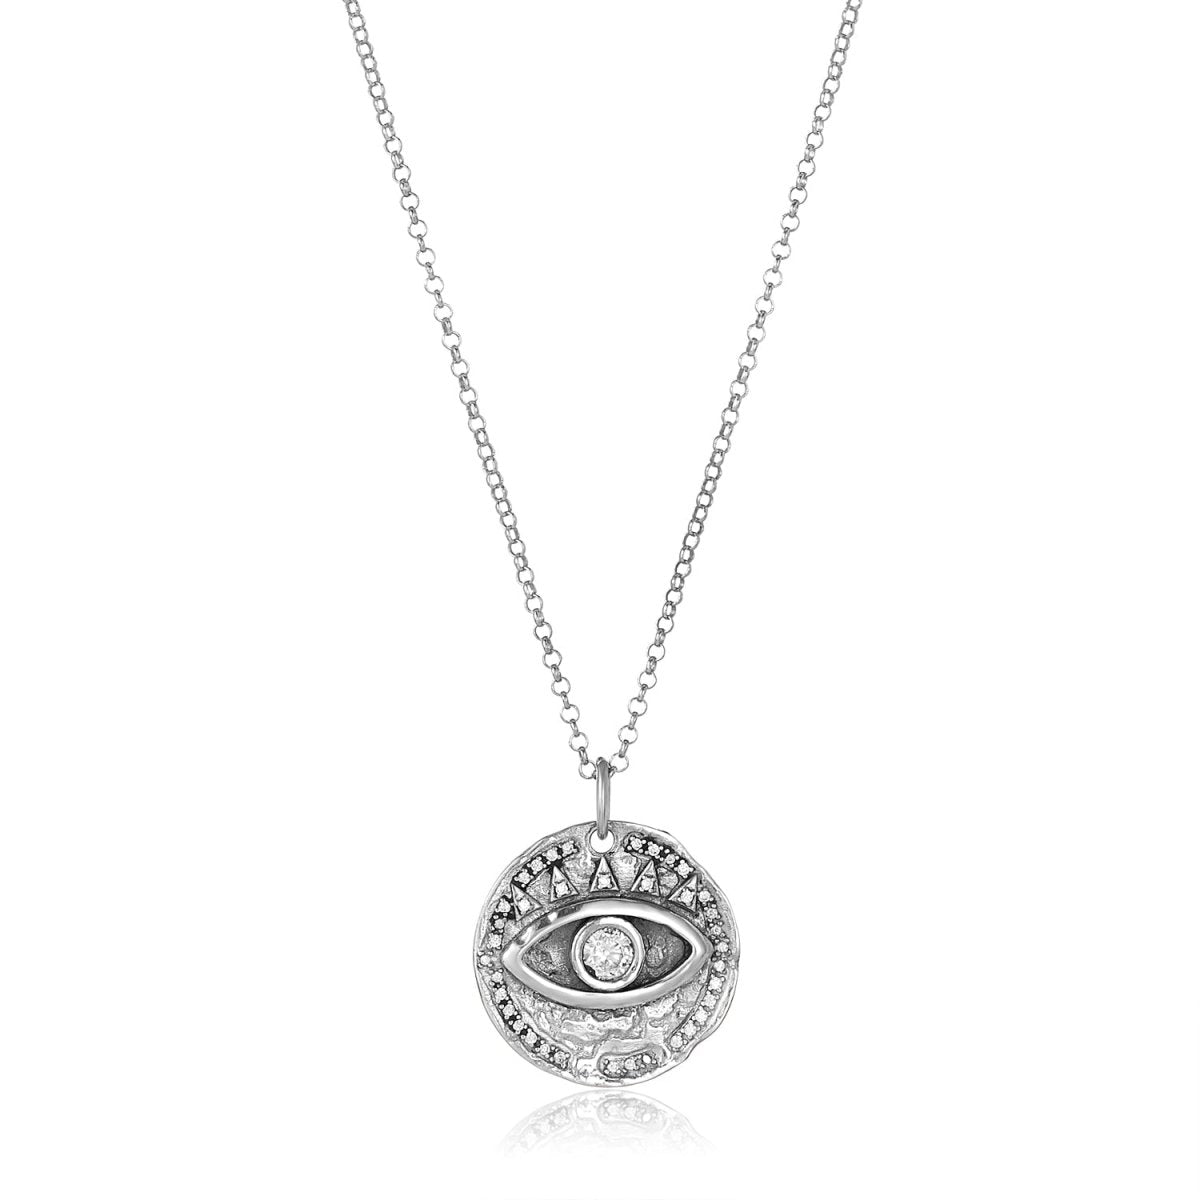 Single Eye Evil Protection Necklace in Sterling Silver